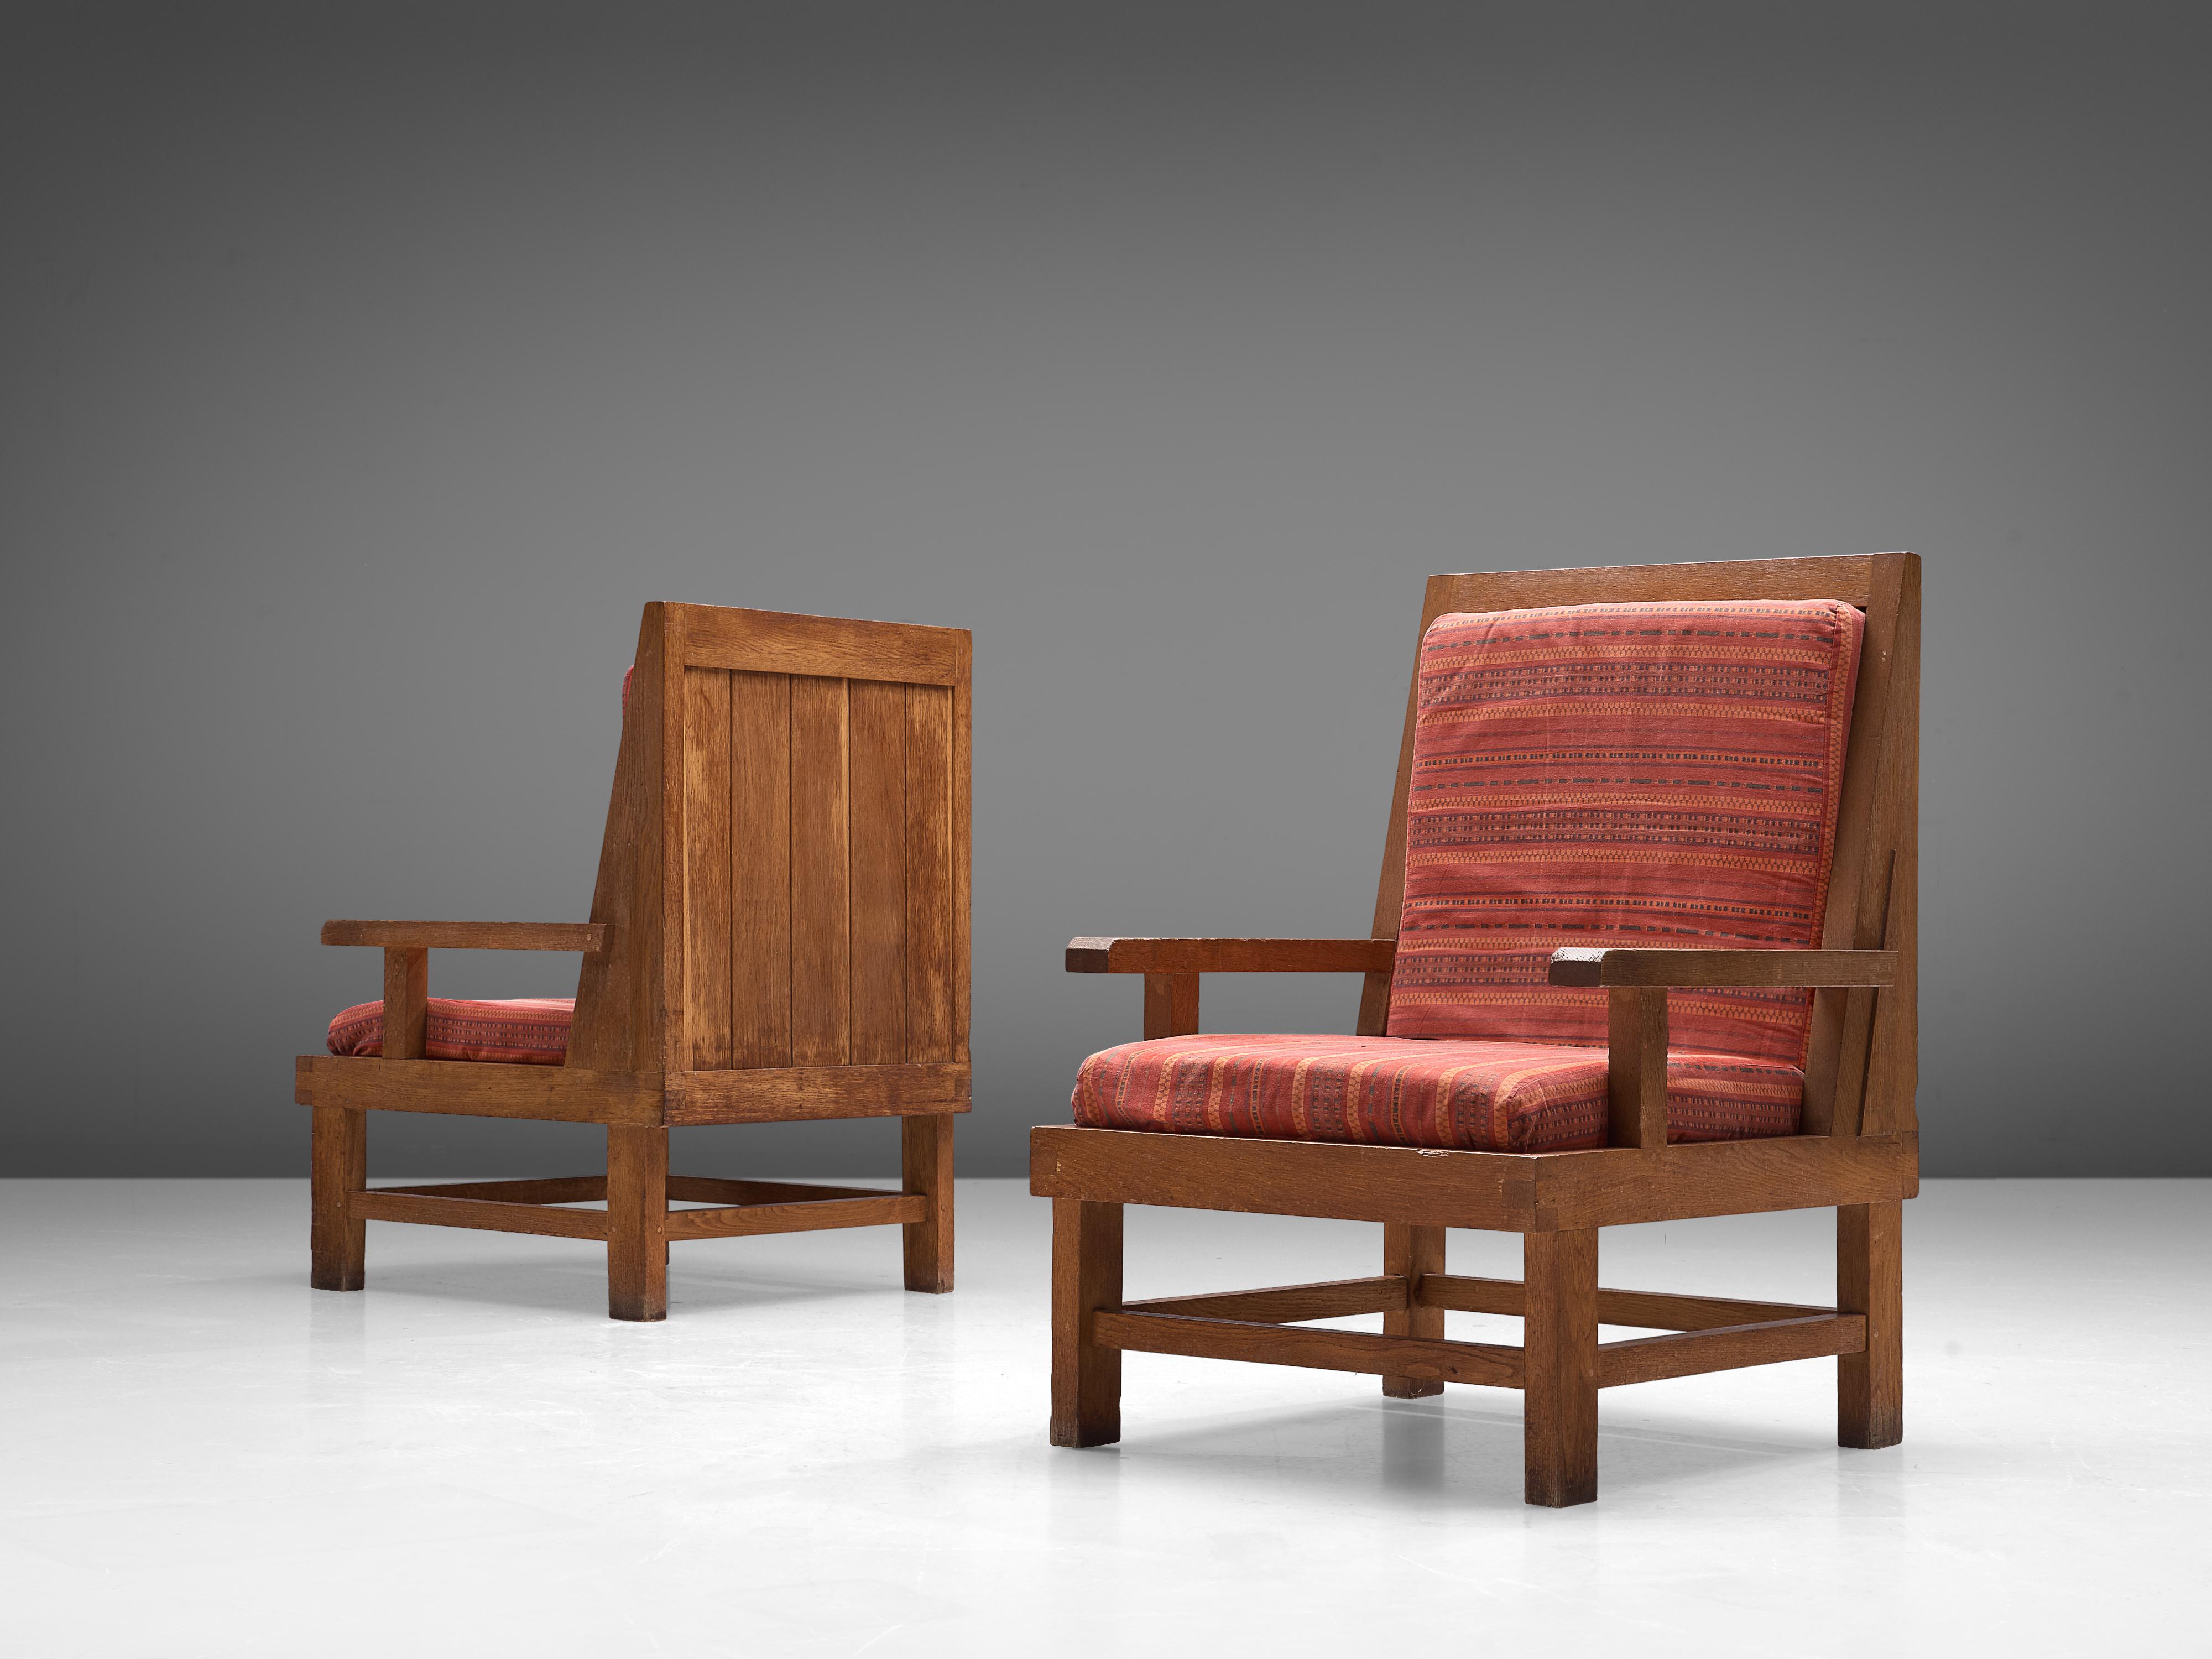 Pair of armchairs, oak, fabric, France, 1930s

These sturdy French easy chairs are geometric in their forms as it is build up completely in horizontal and vertical lines. The back is structured vertically by means of five slats. The armrests and